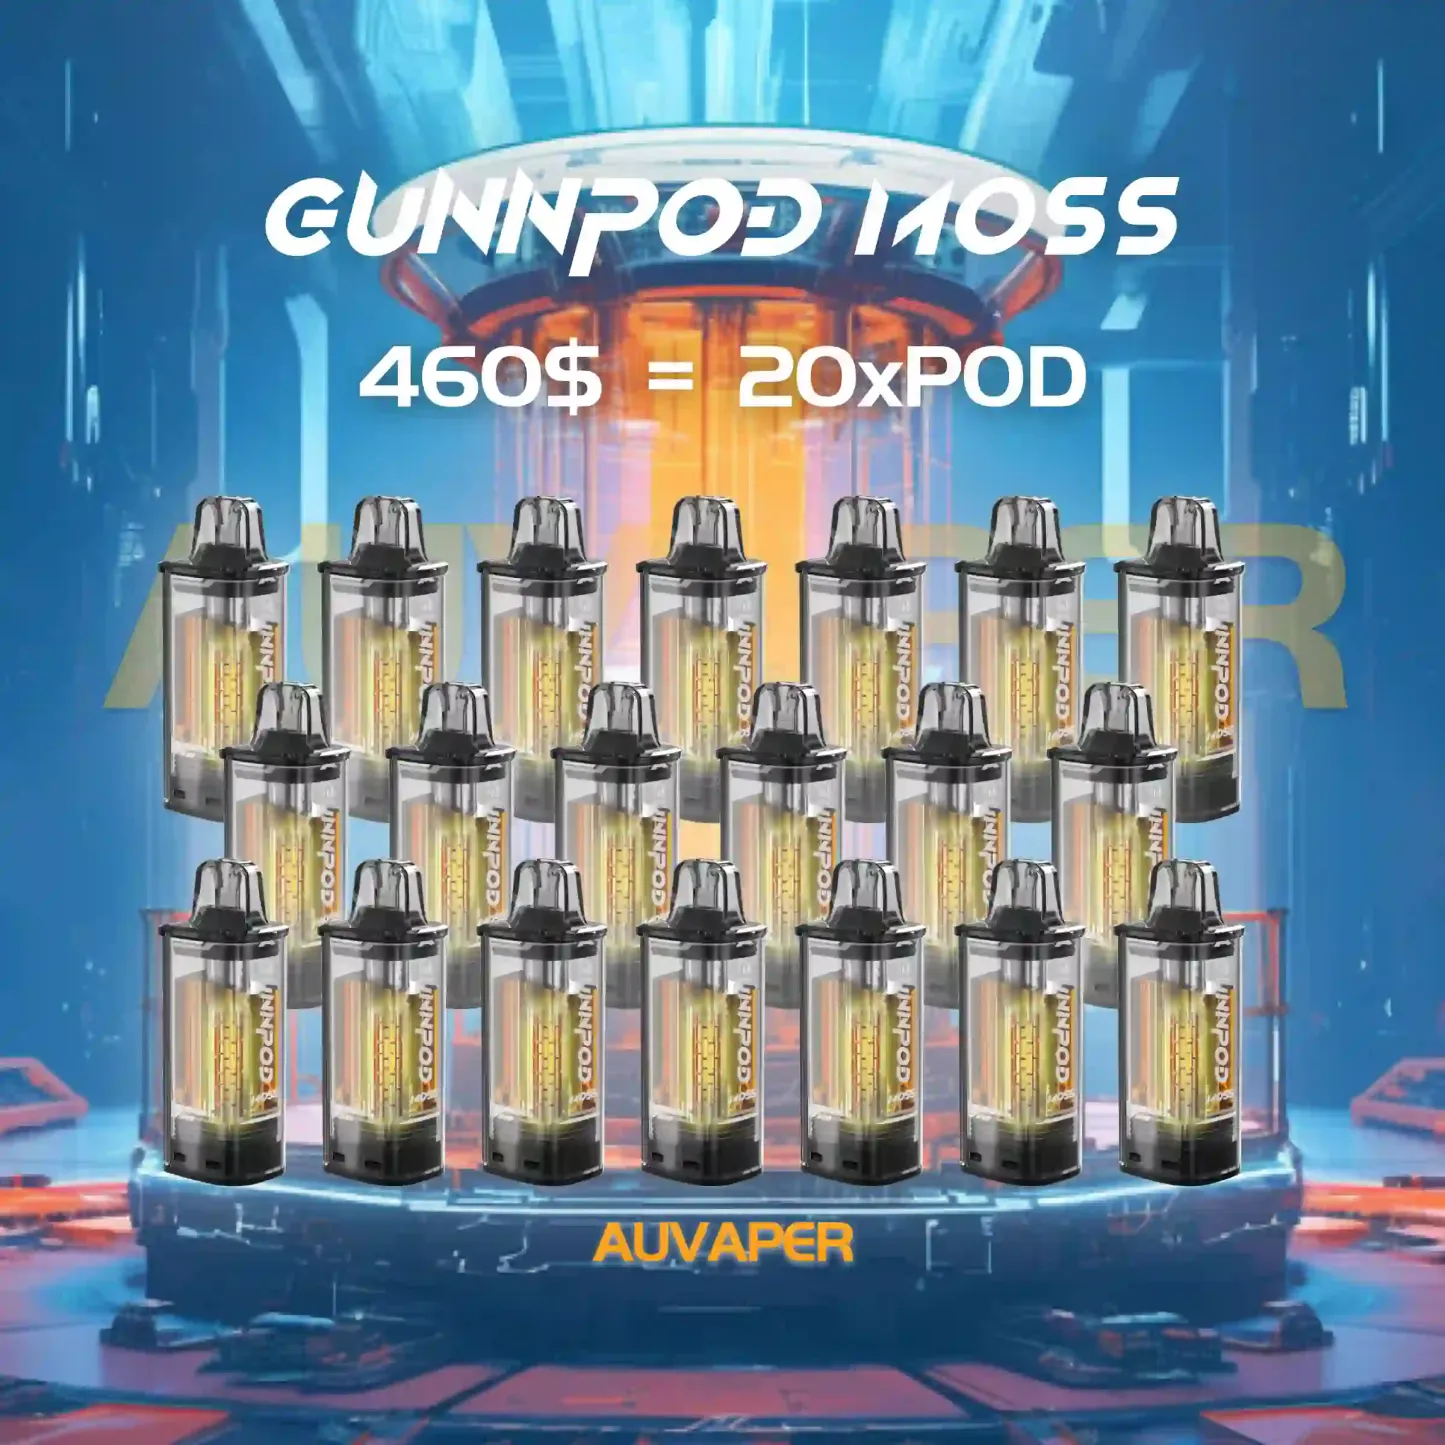 GUNNPOD MOSS Limited Edition Packages：20POD